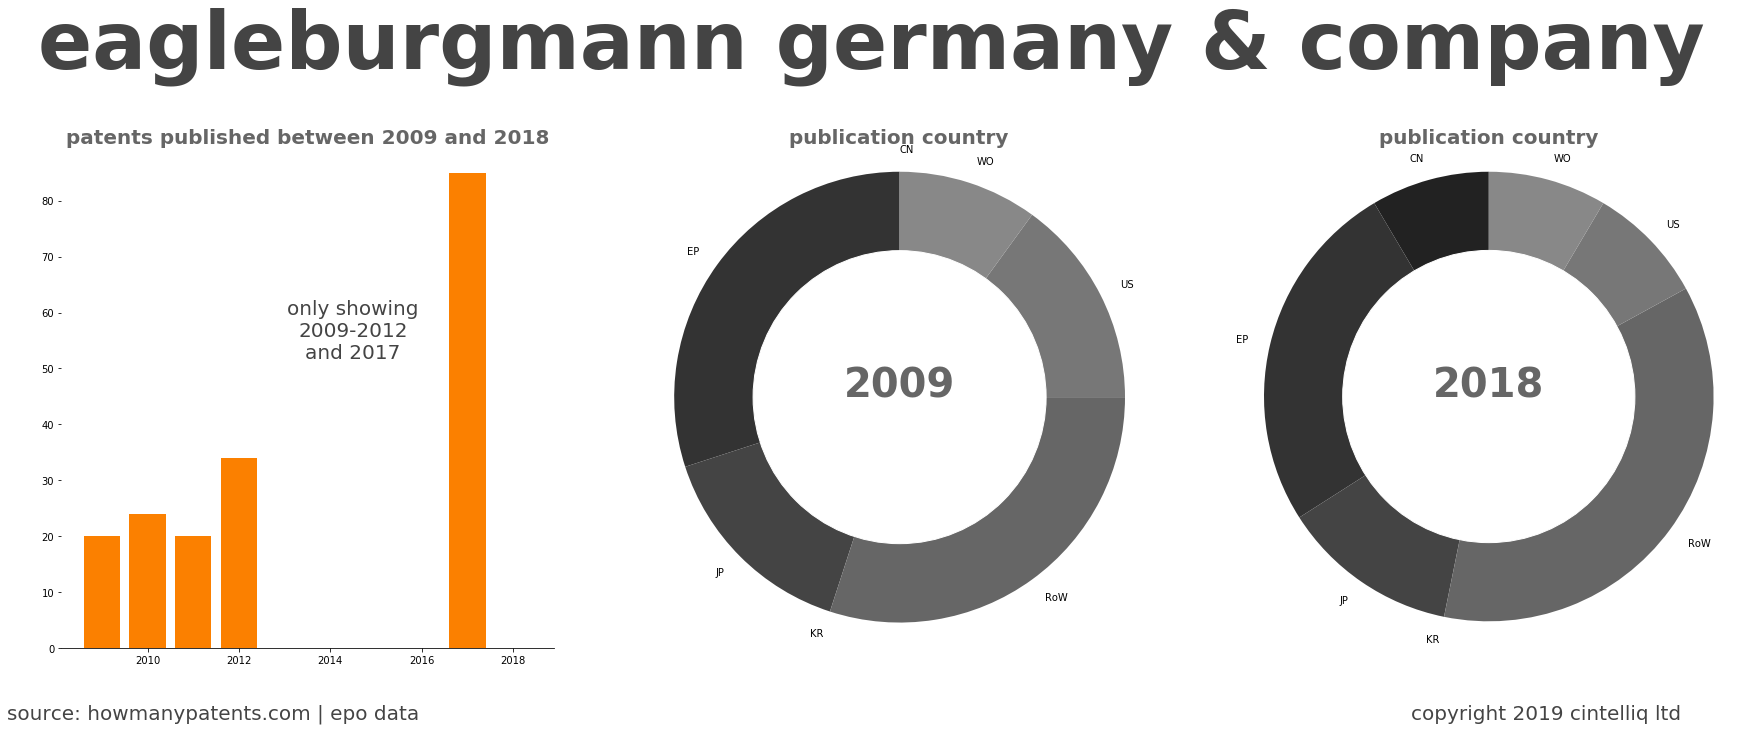 summary of patents for Eagleburgmann Germany & Company